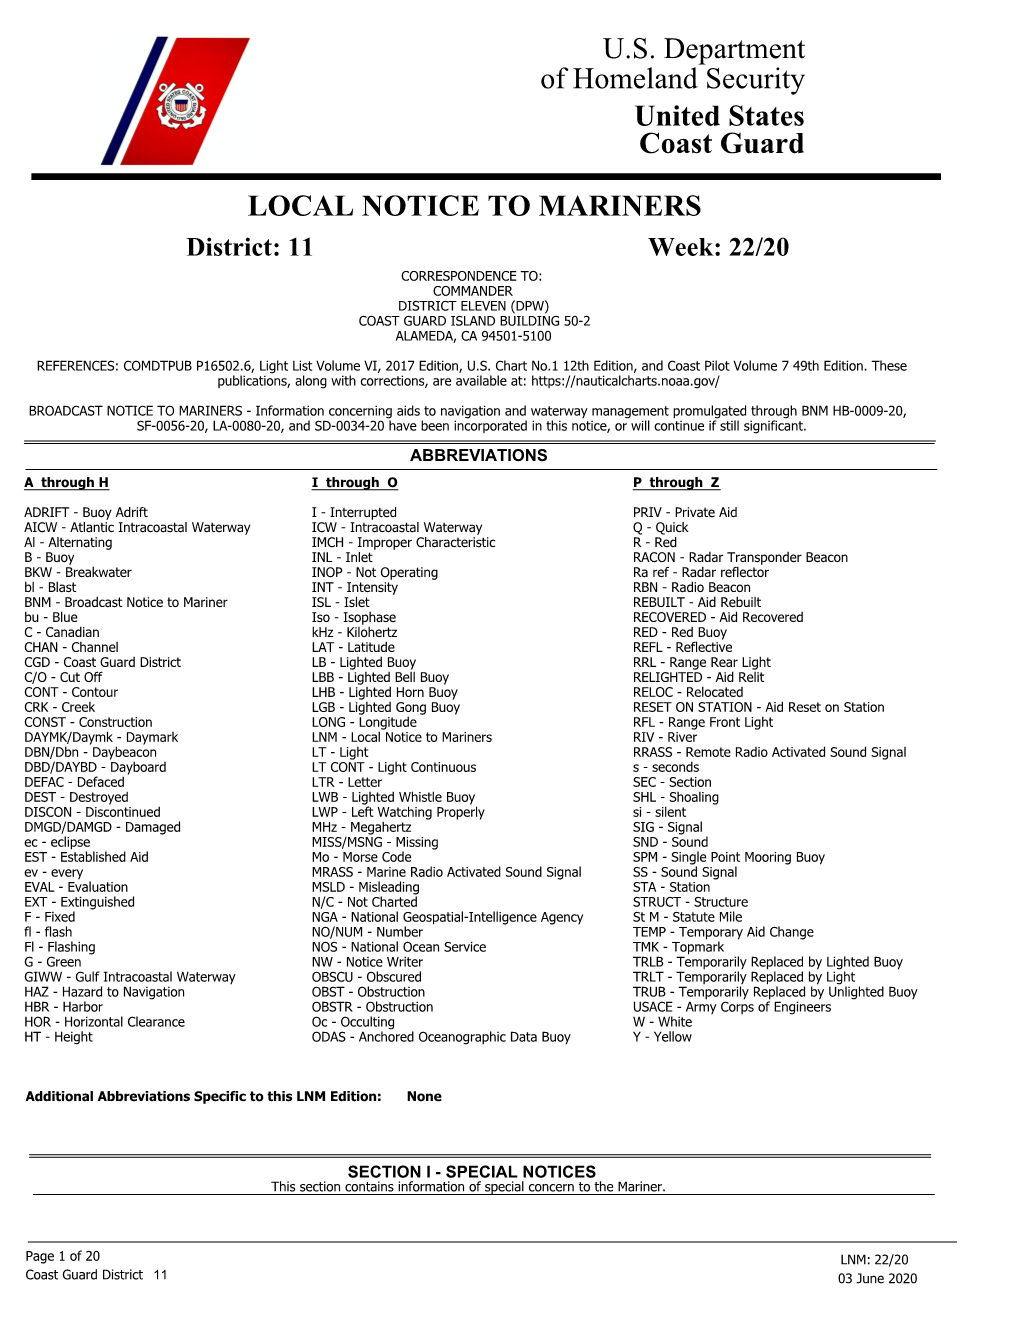 Local Notice to Mariners Lnm11222020